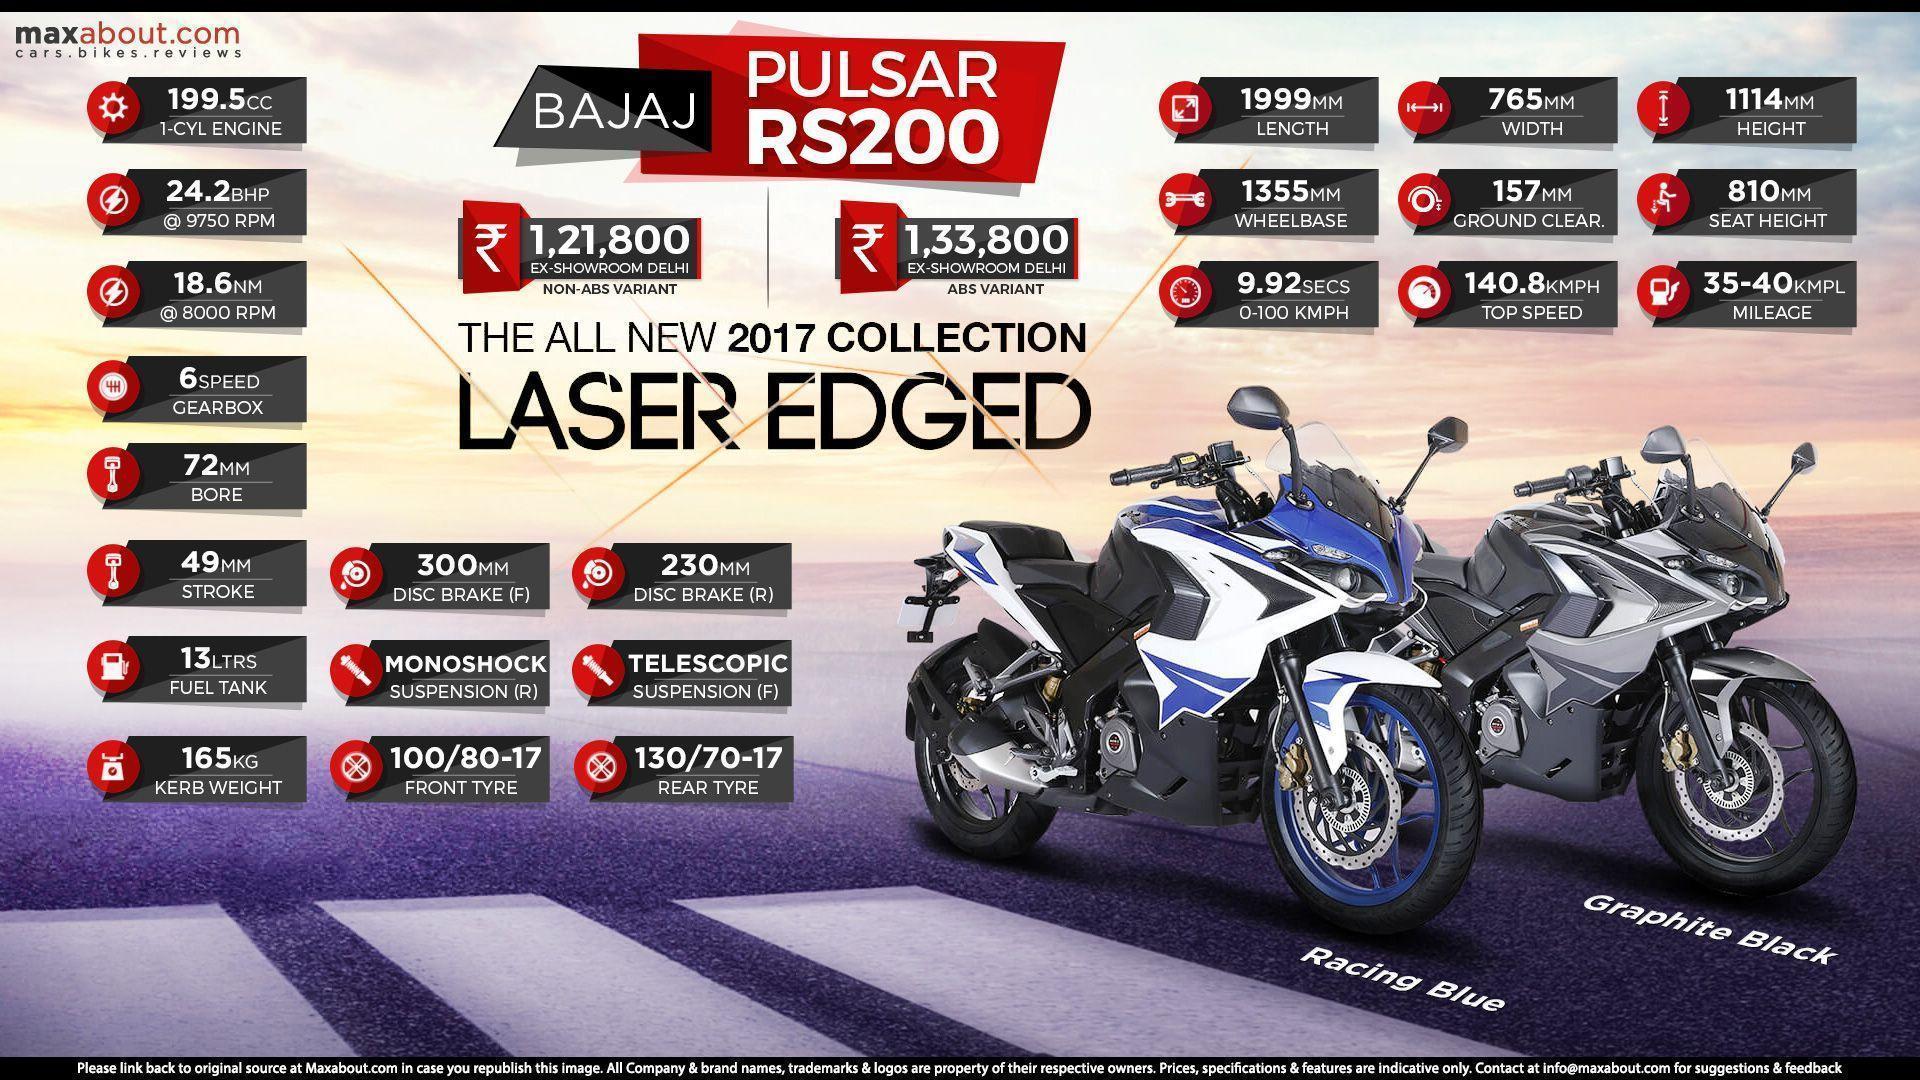 Fast Facts about 2017 Bajaj Pulsar RS200